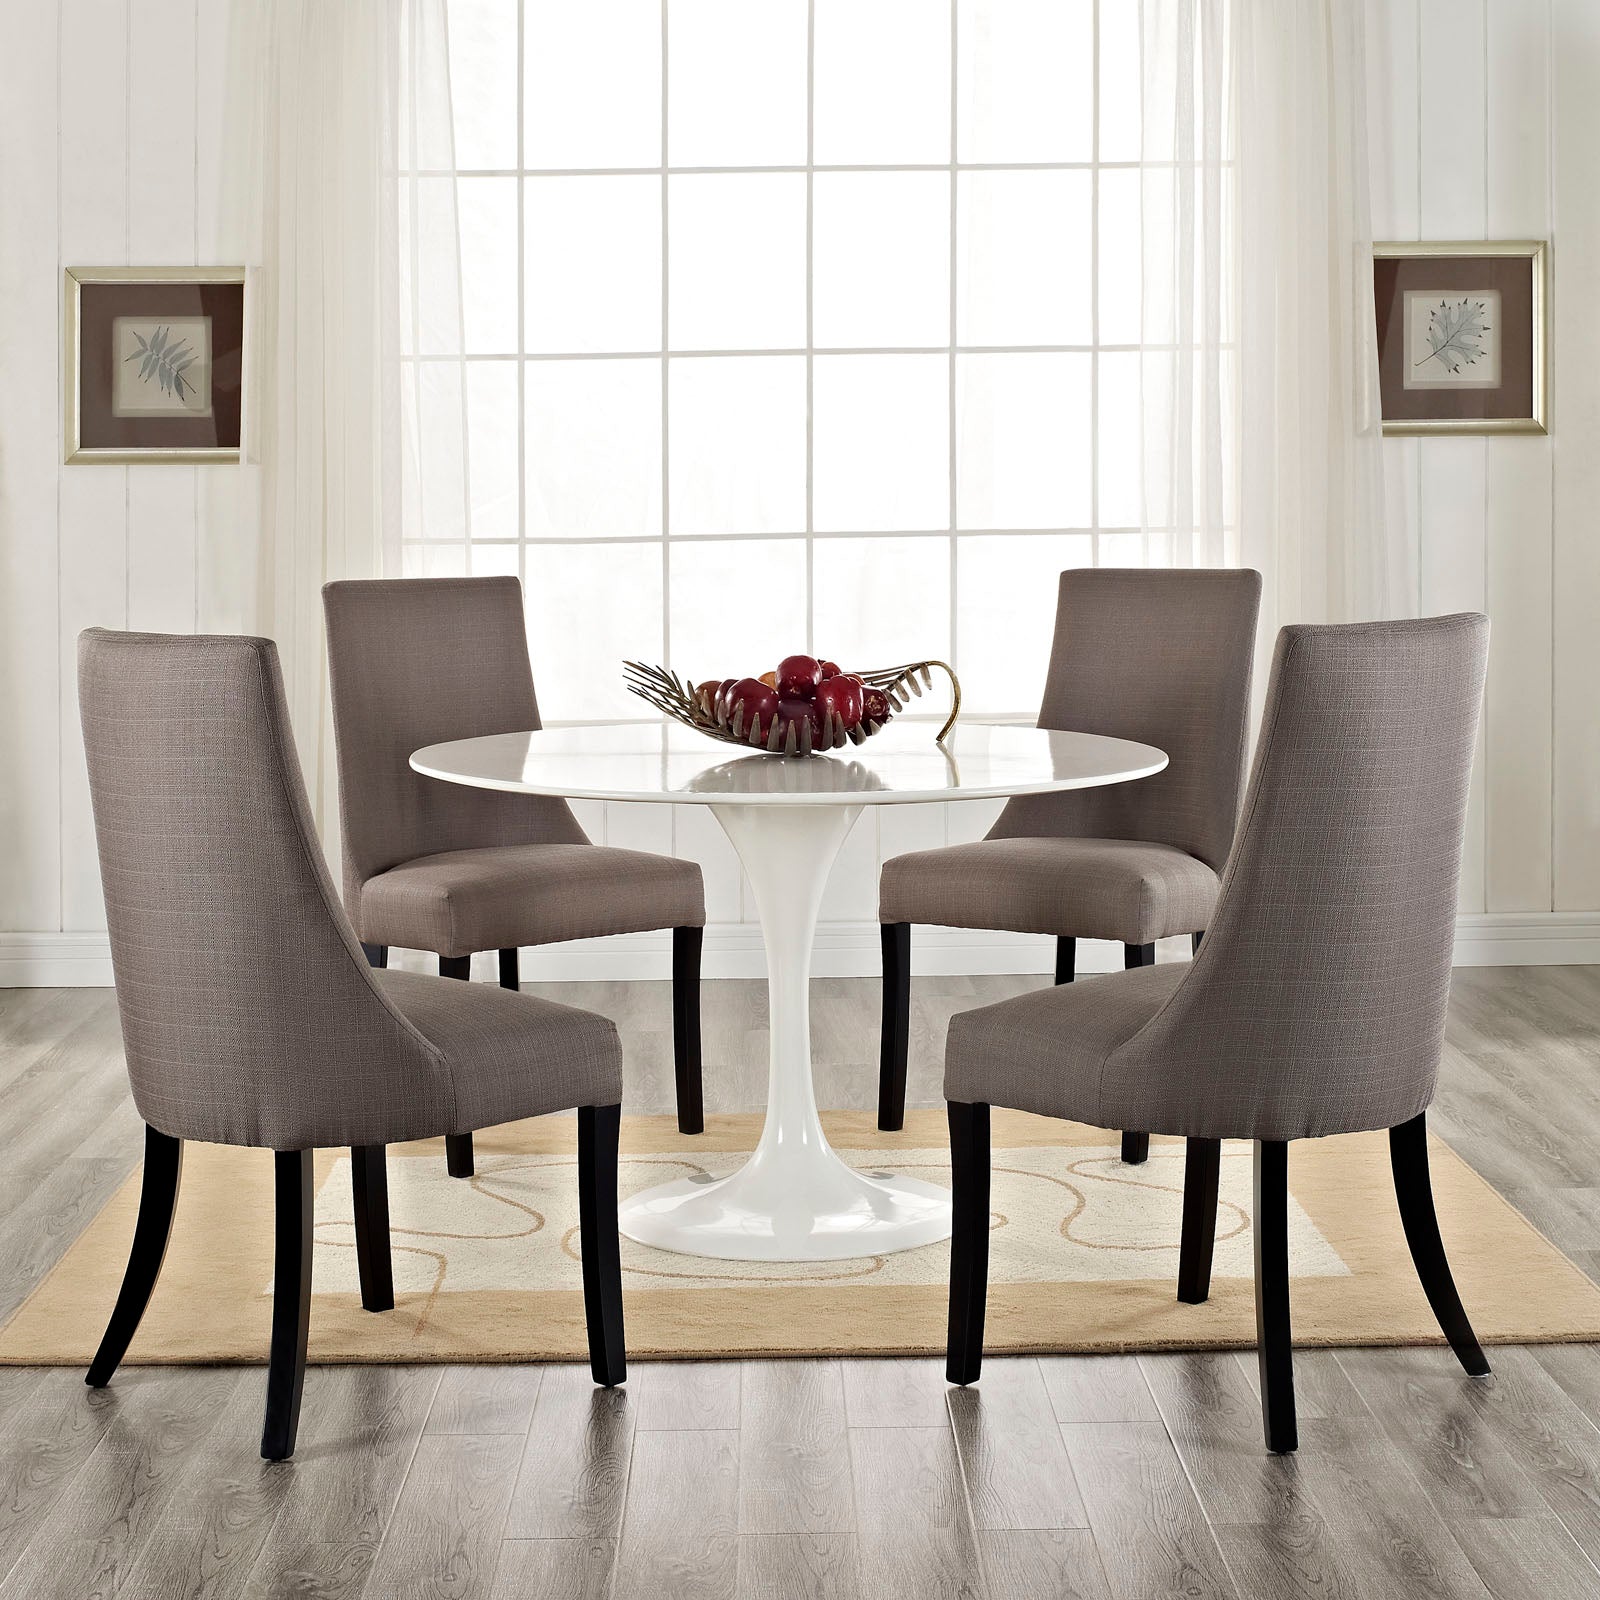 Reverie Dining Side Chair Set of 4